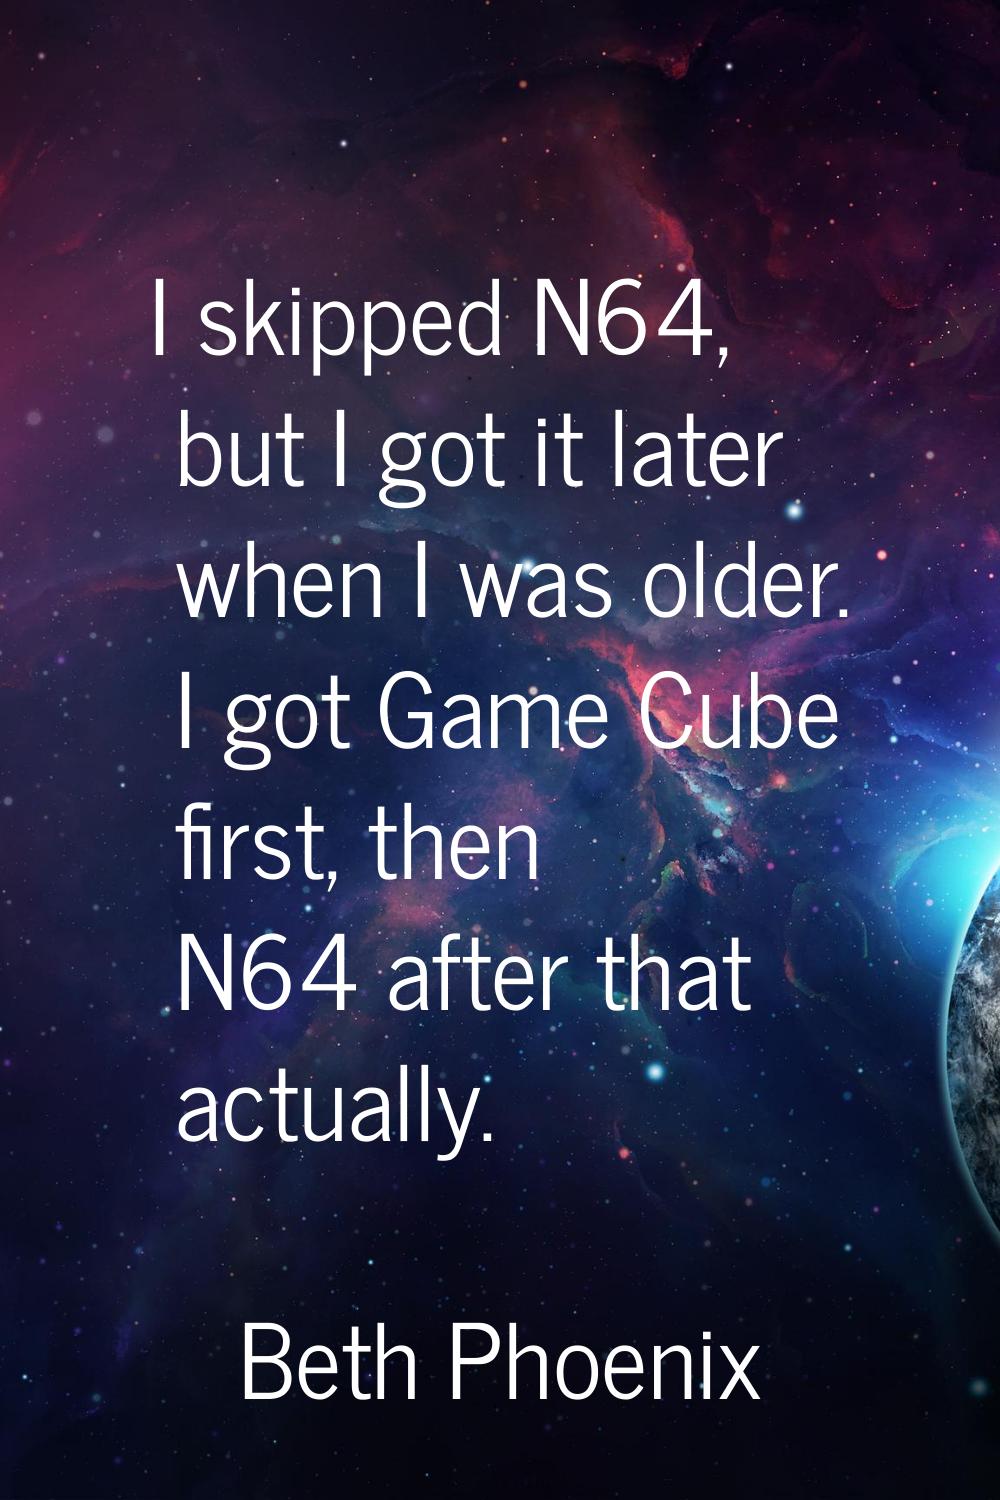 I skipped N64, but I got it later when I was older. I got Game Cube first, then N64 after that actu